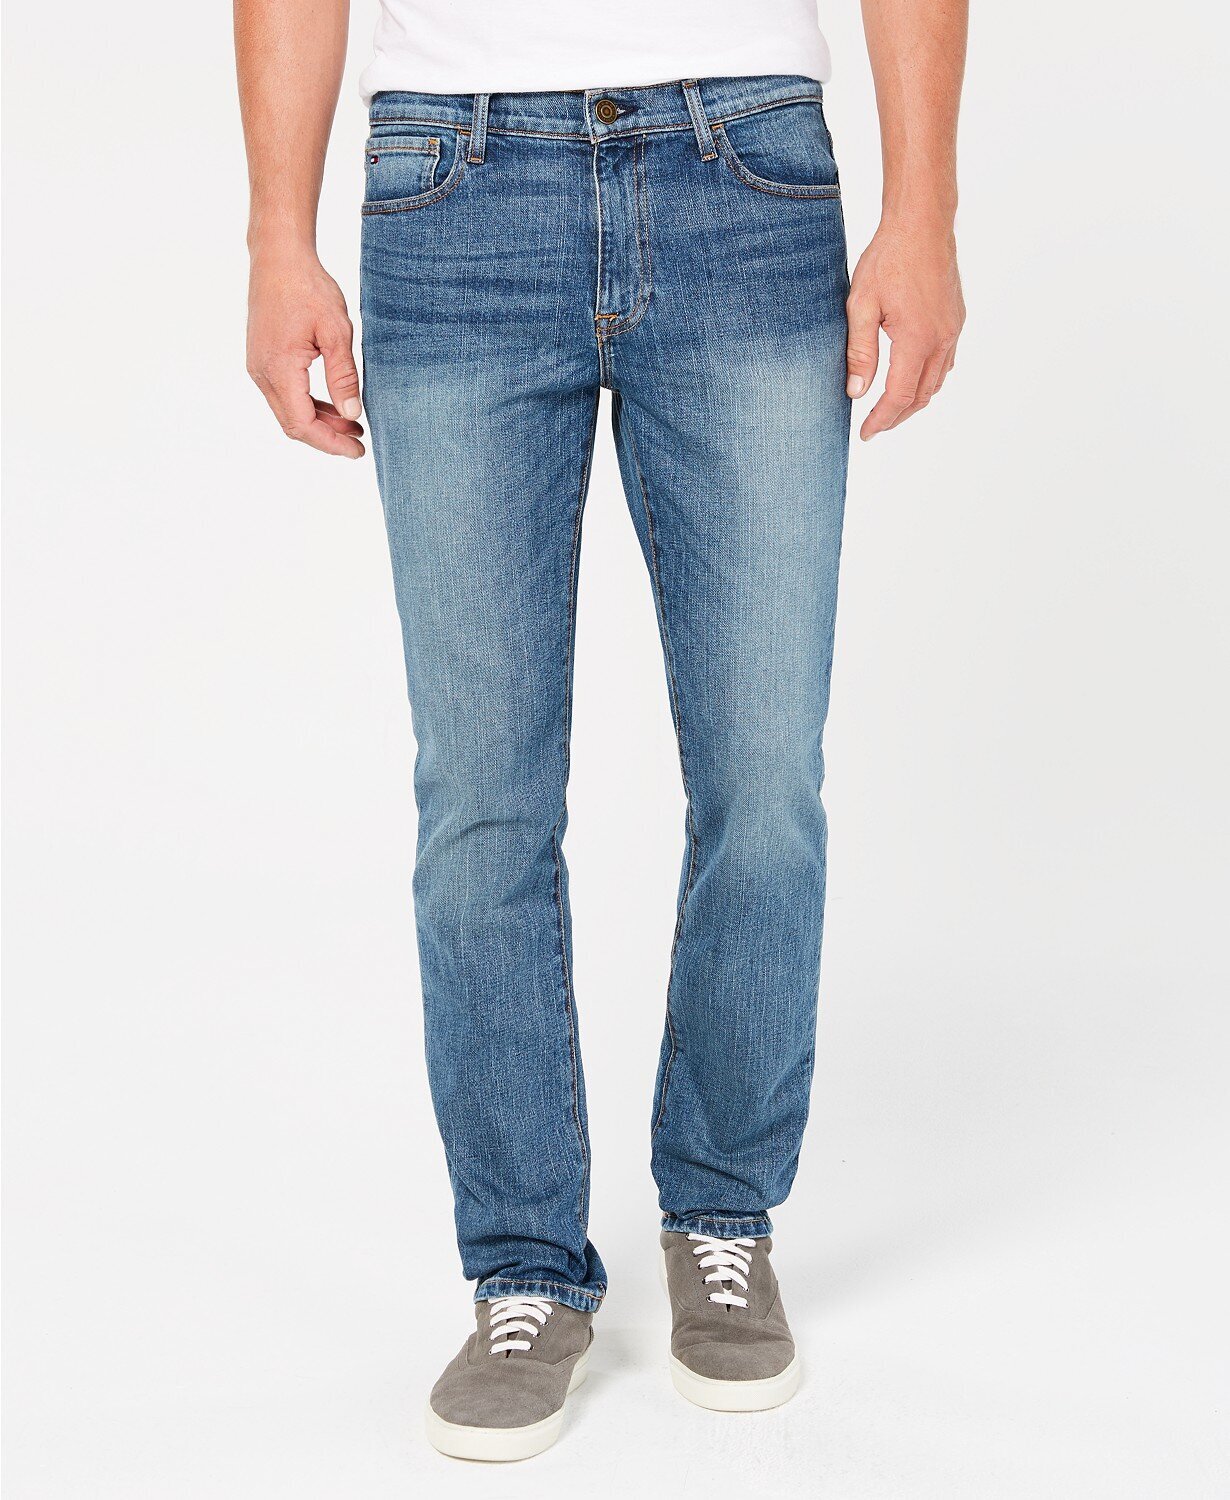 most comfortable relaxed fit jeans